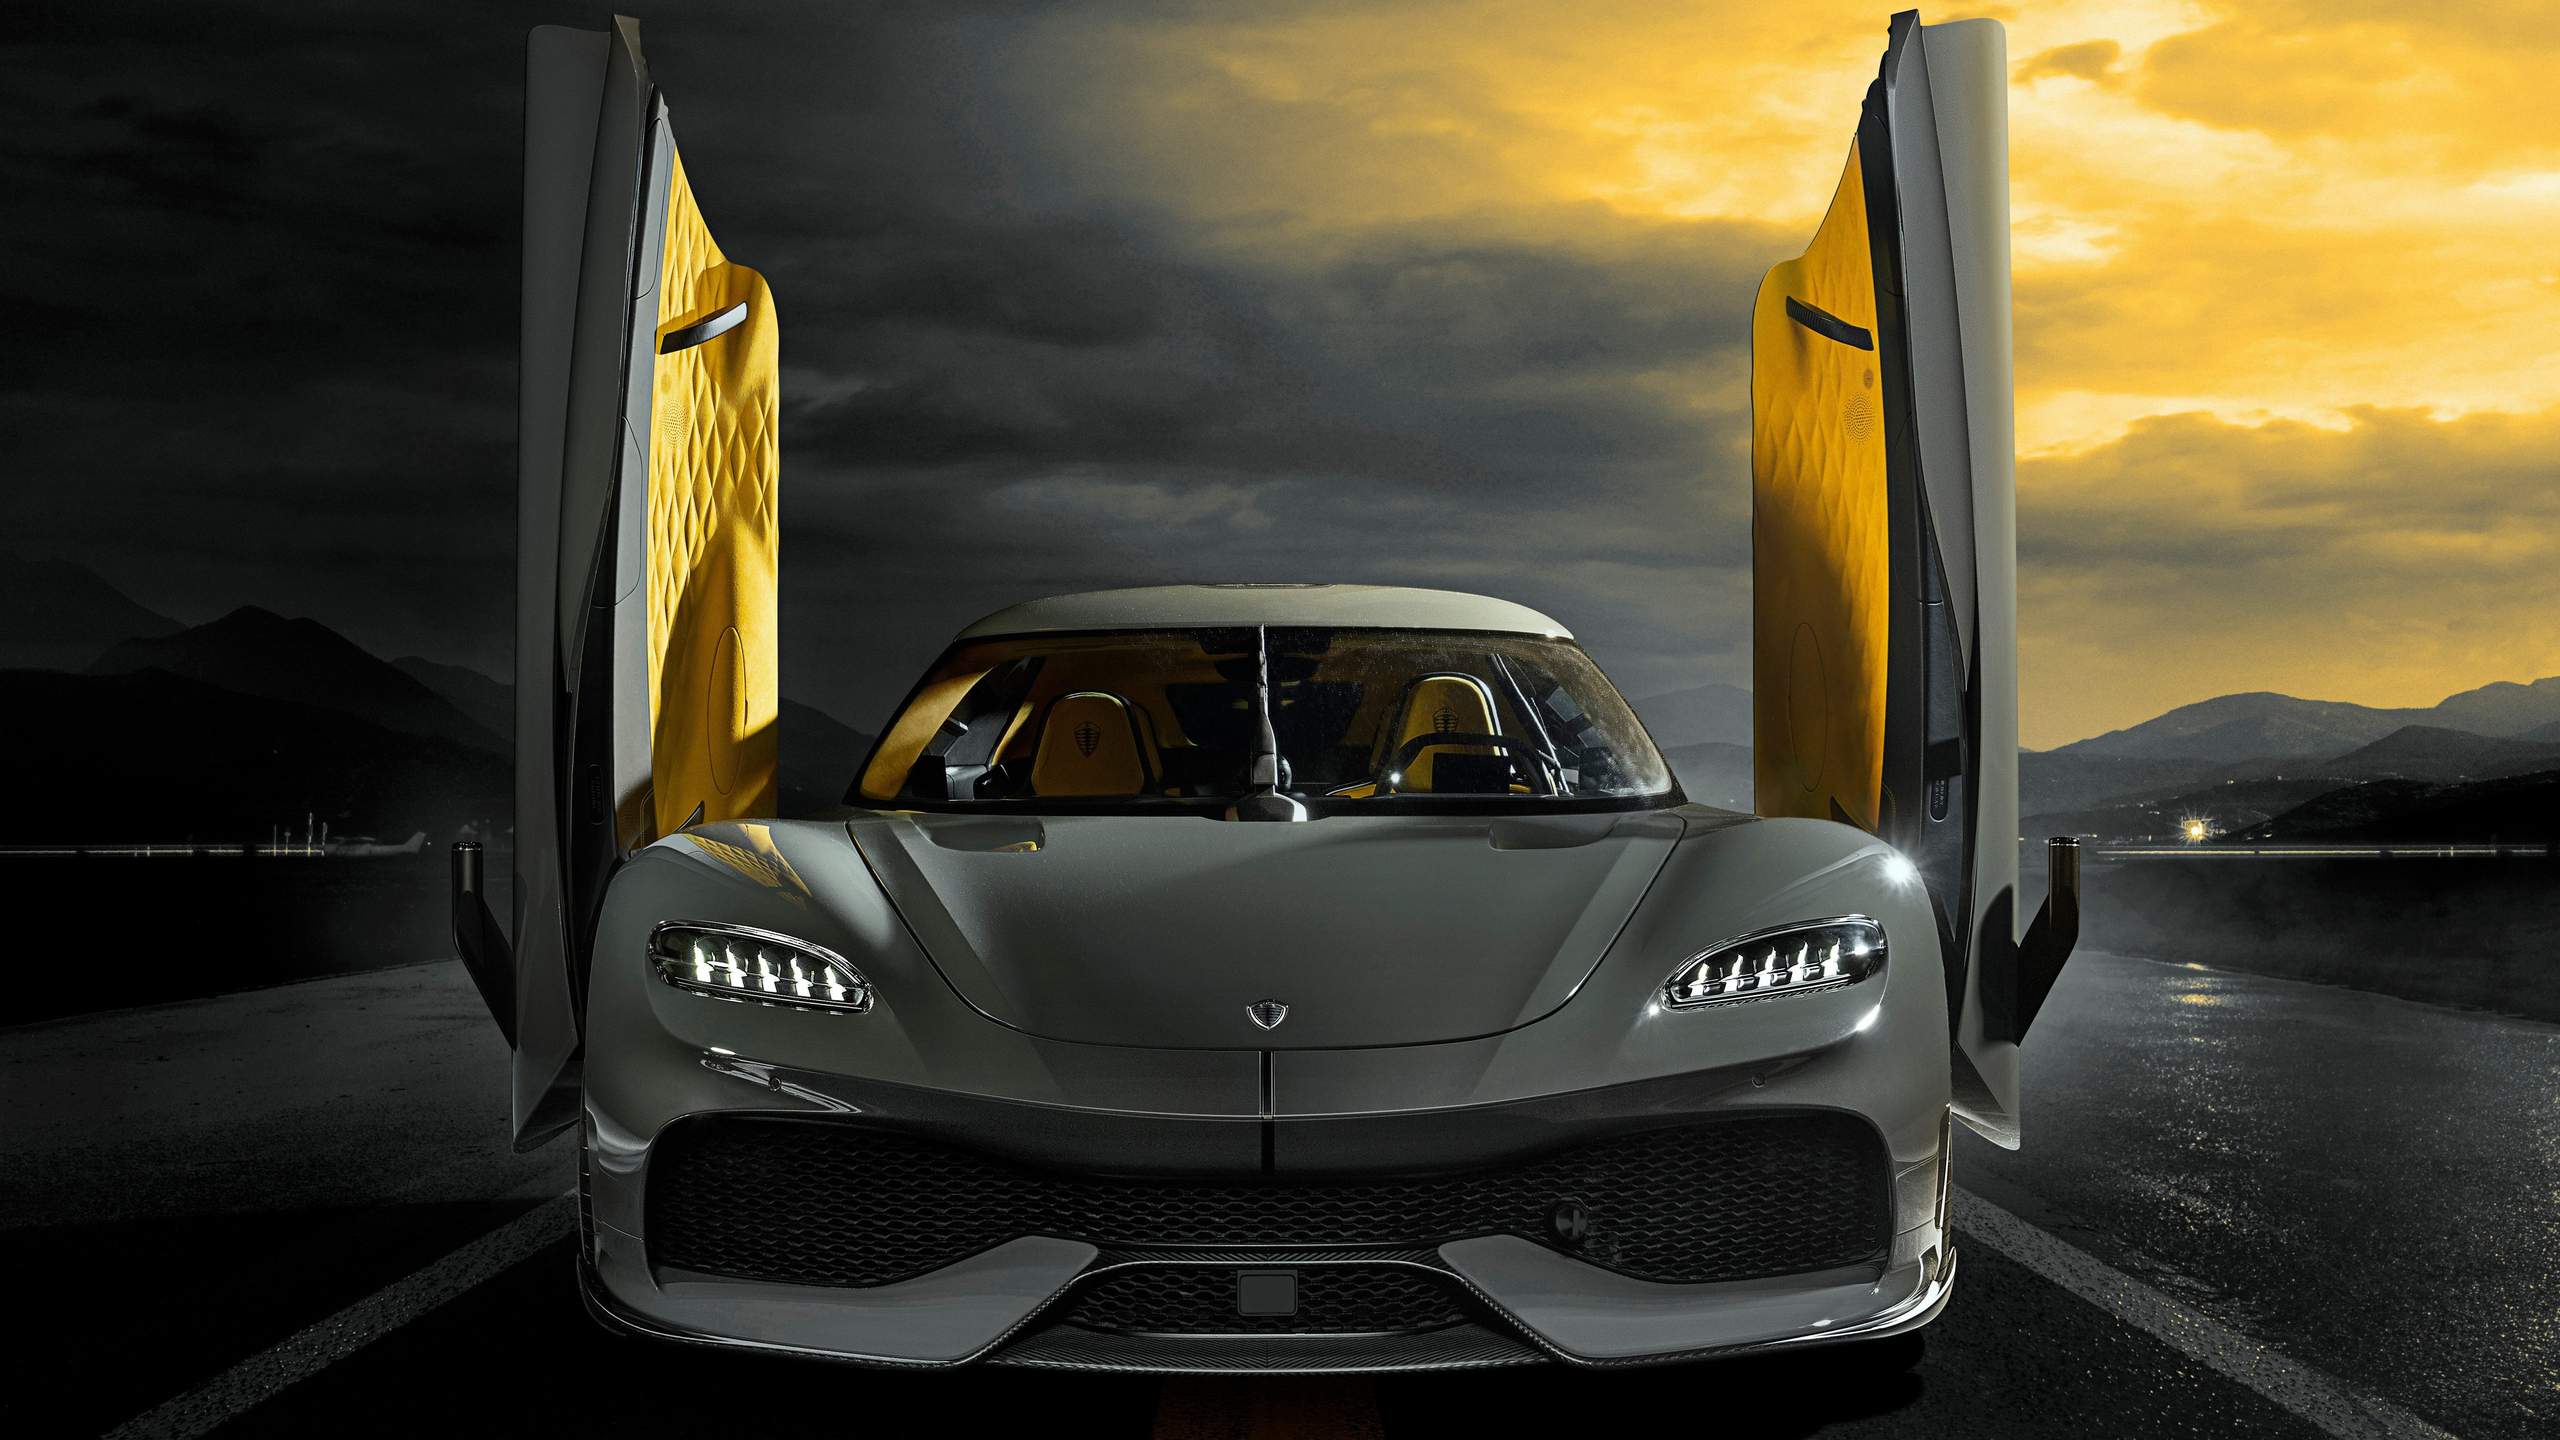 2560x1440 Koenigsegg Gemera 2020 5k 1440p Resolution Hd 4k Wallpapers Images Backgrounds Photos And Pictures